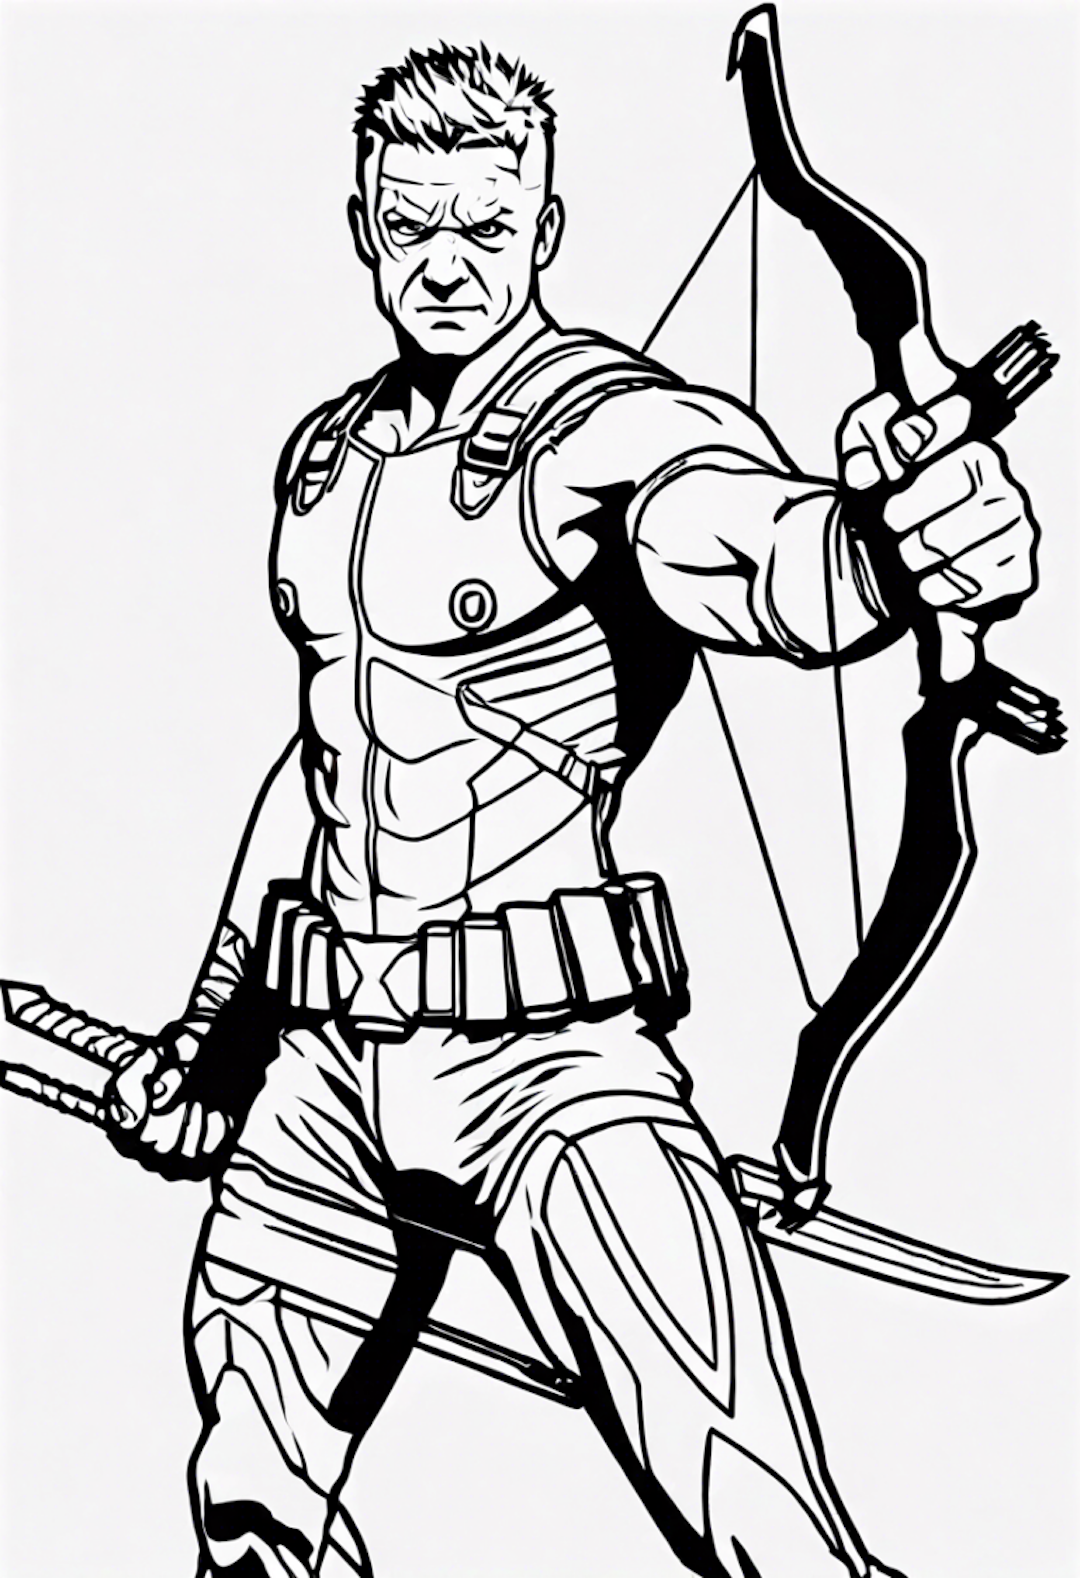 Hawkeye Takes Aim: Epic Coloring Adventure coloring pages